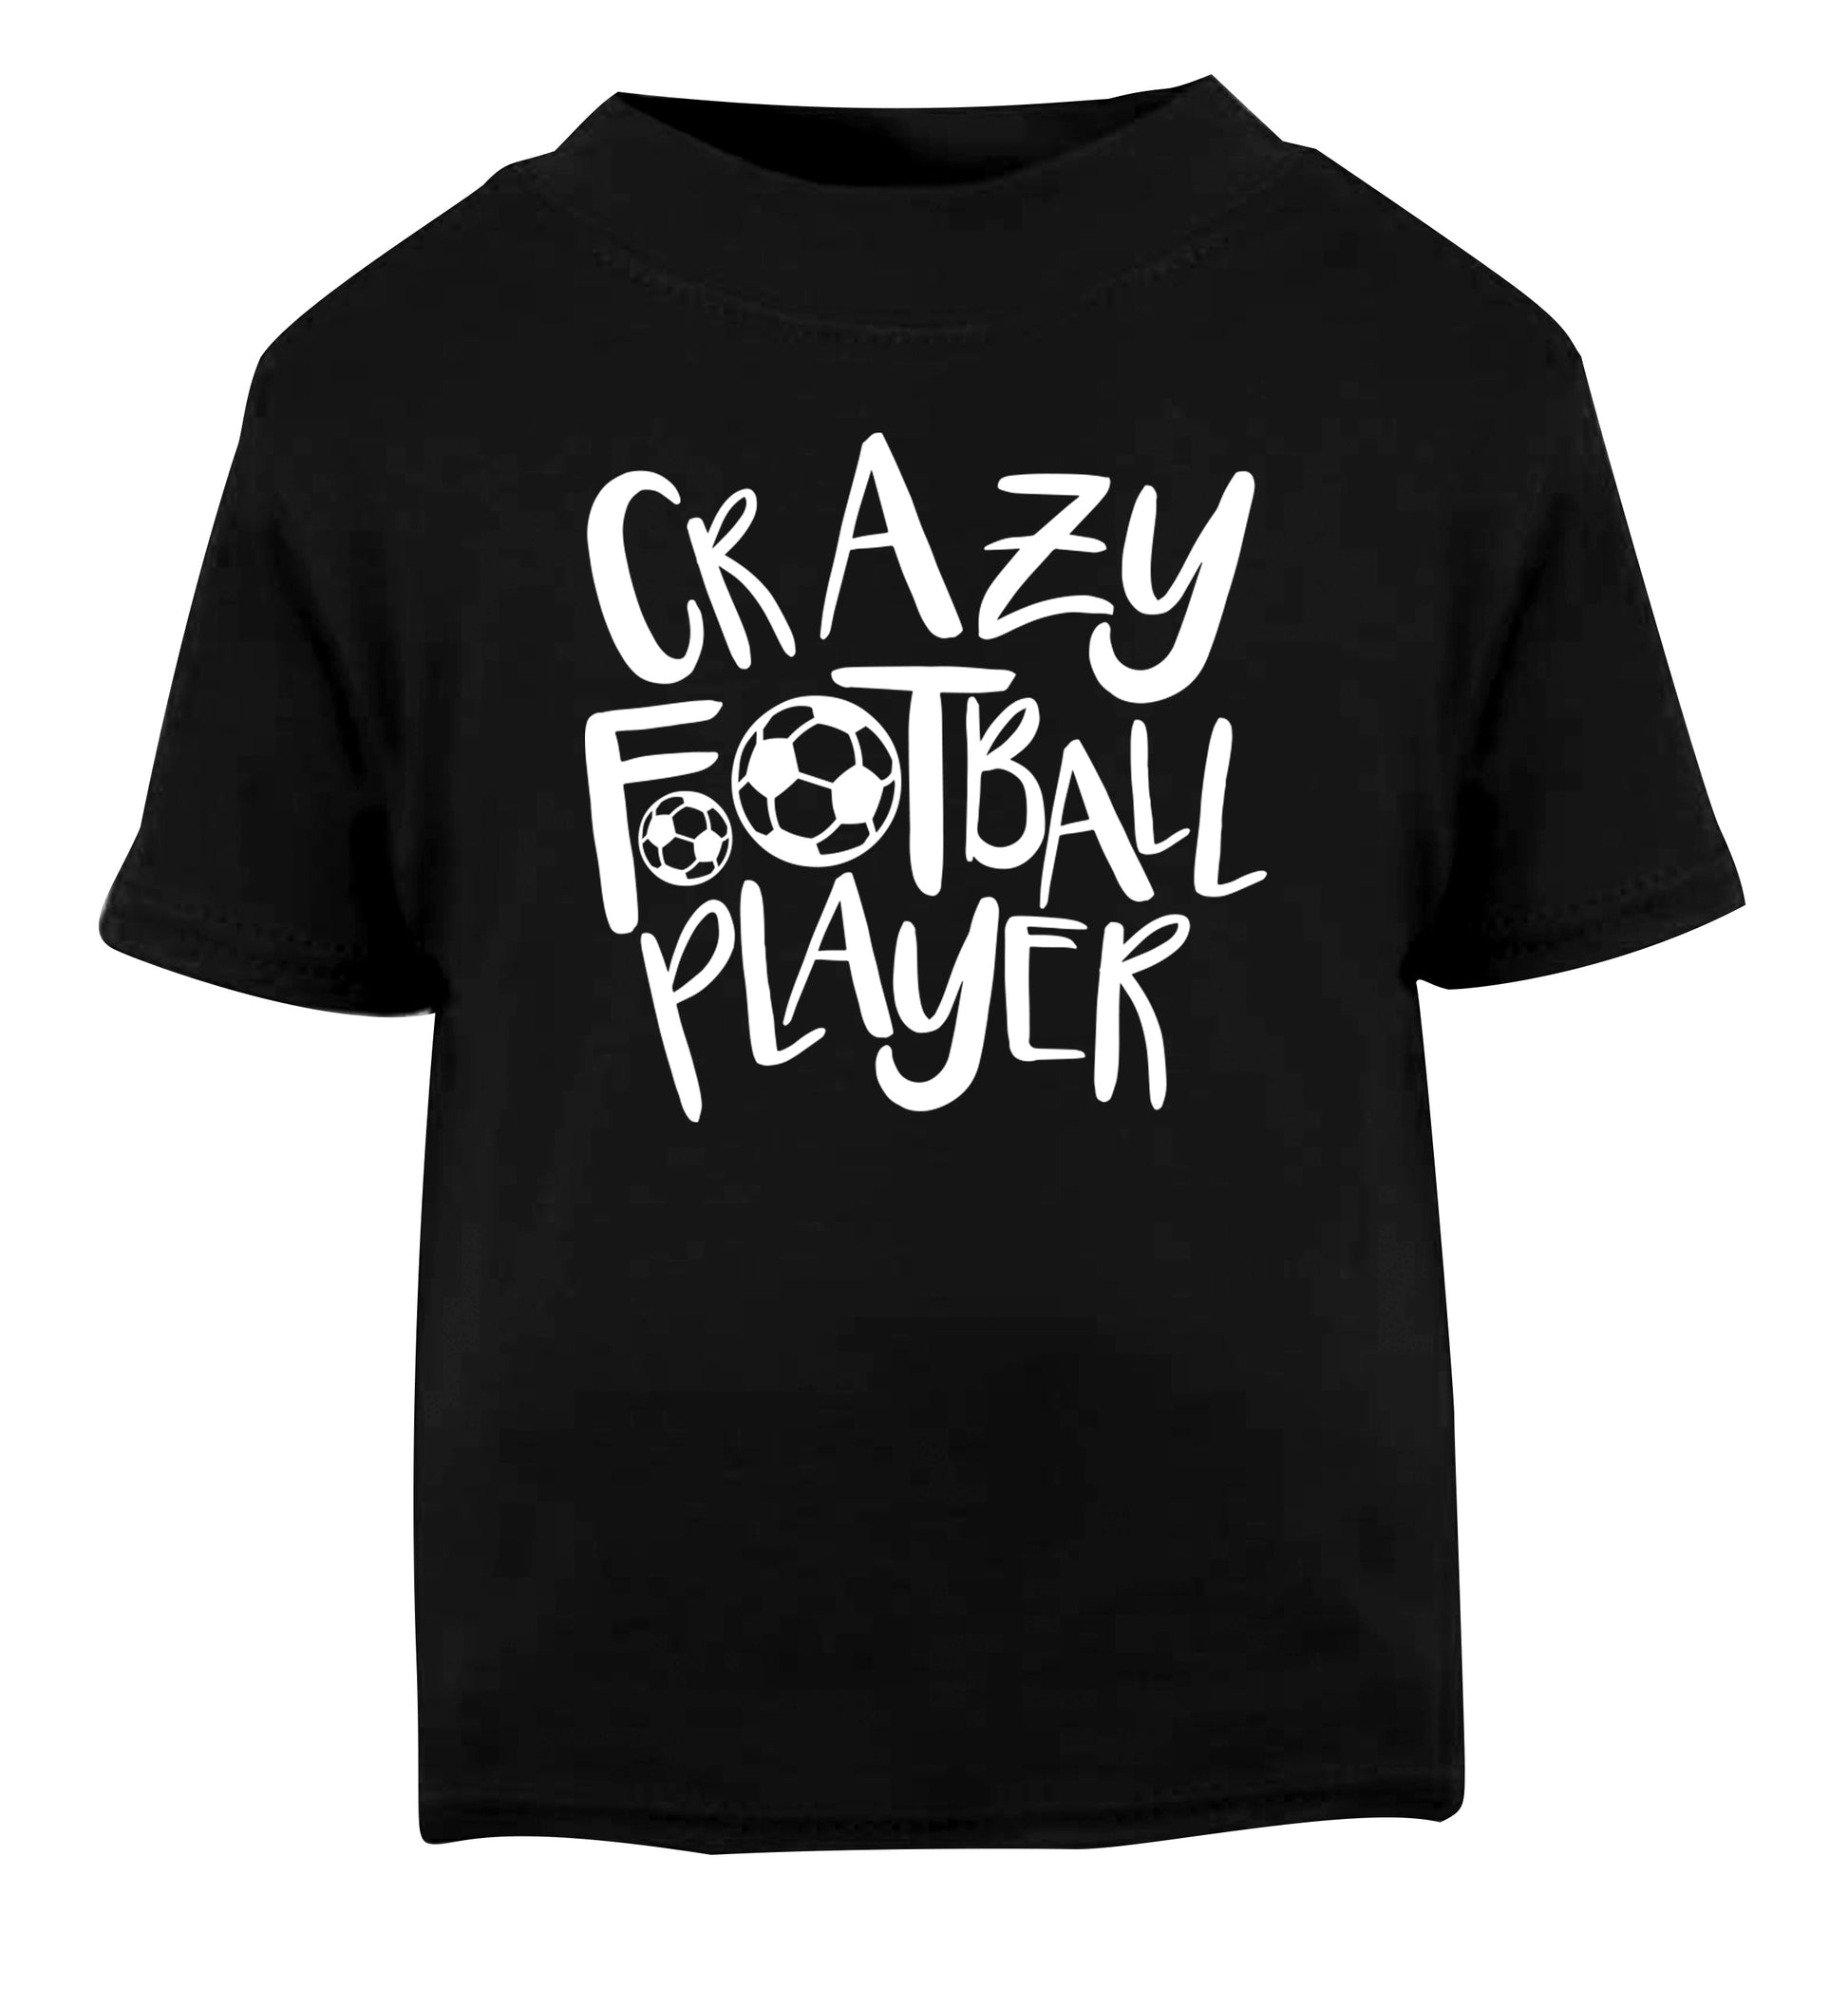 Crazy football player Black Baby Toddler Tshirt 2 years